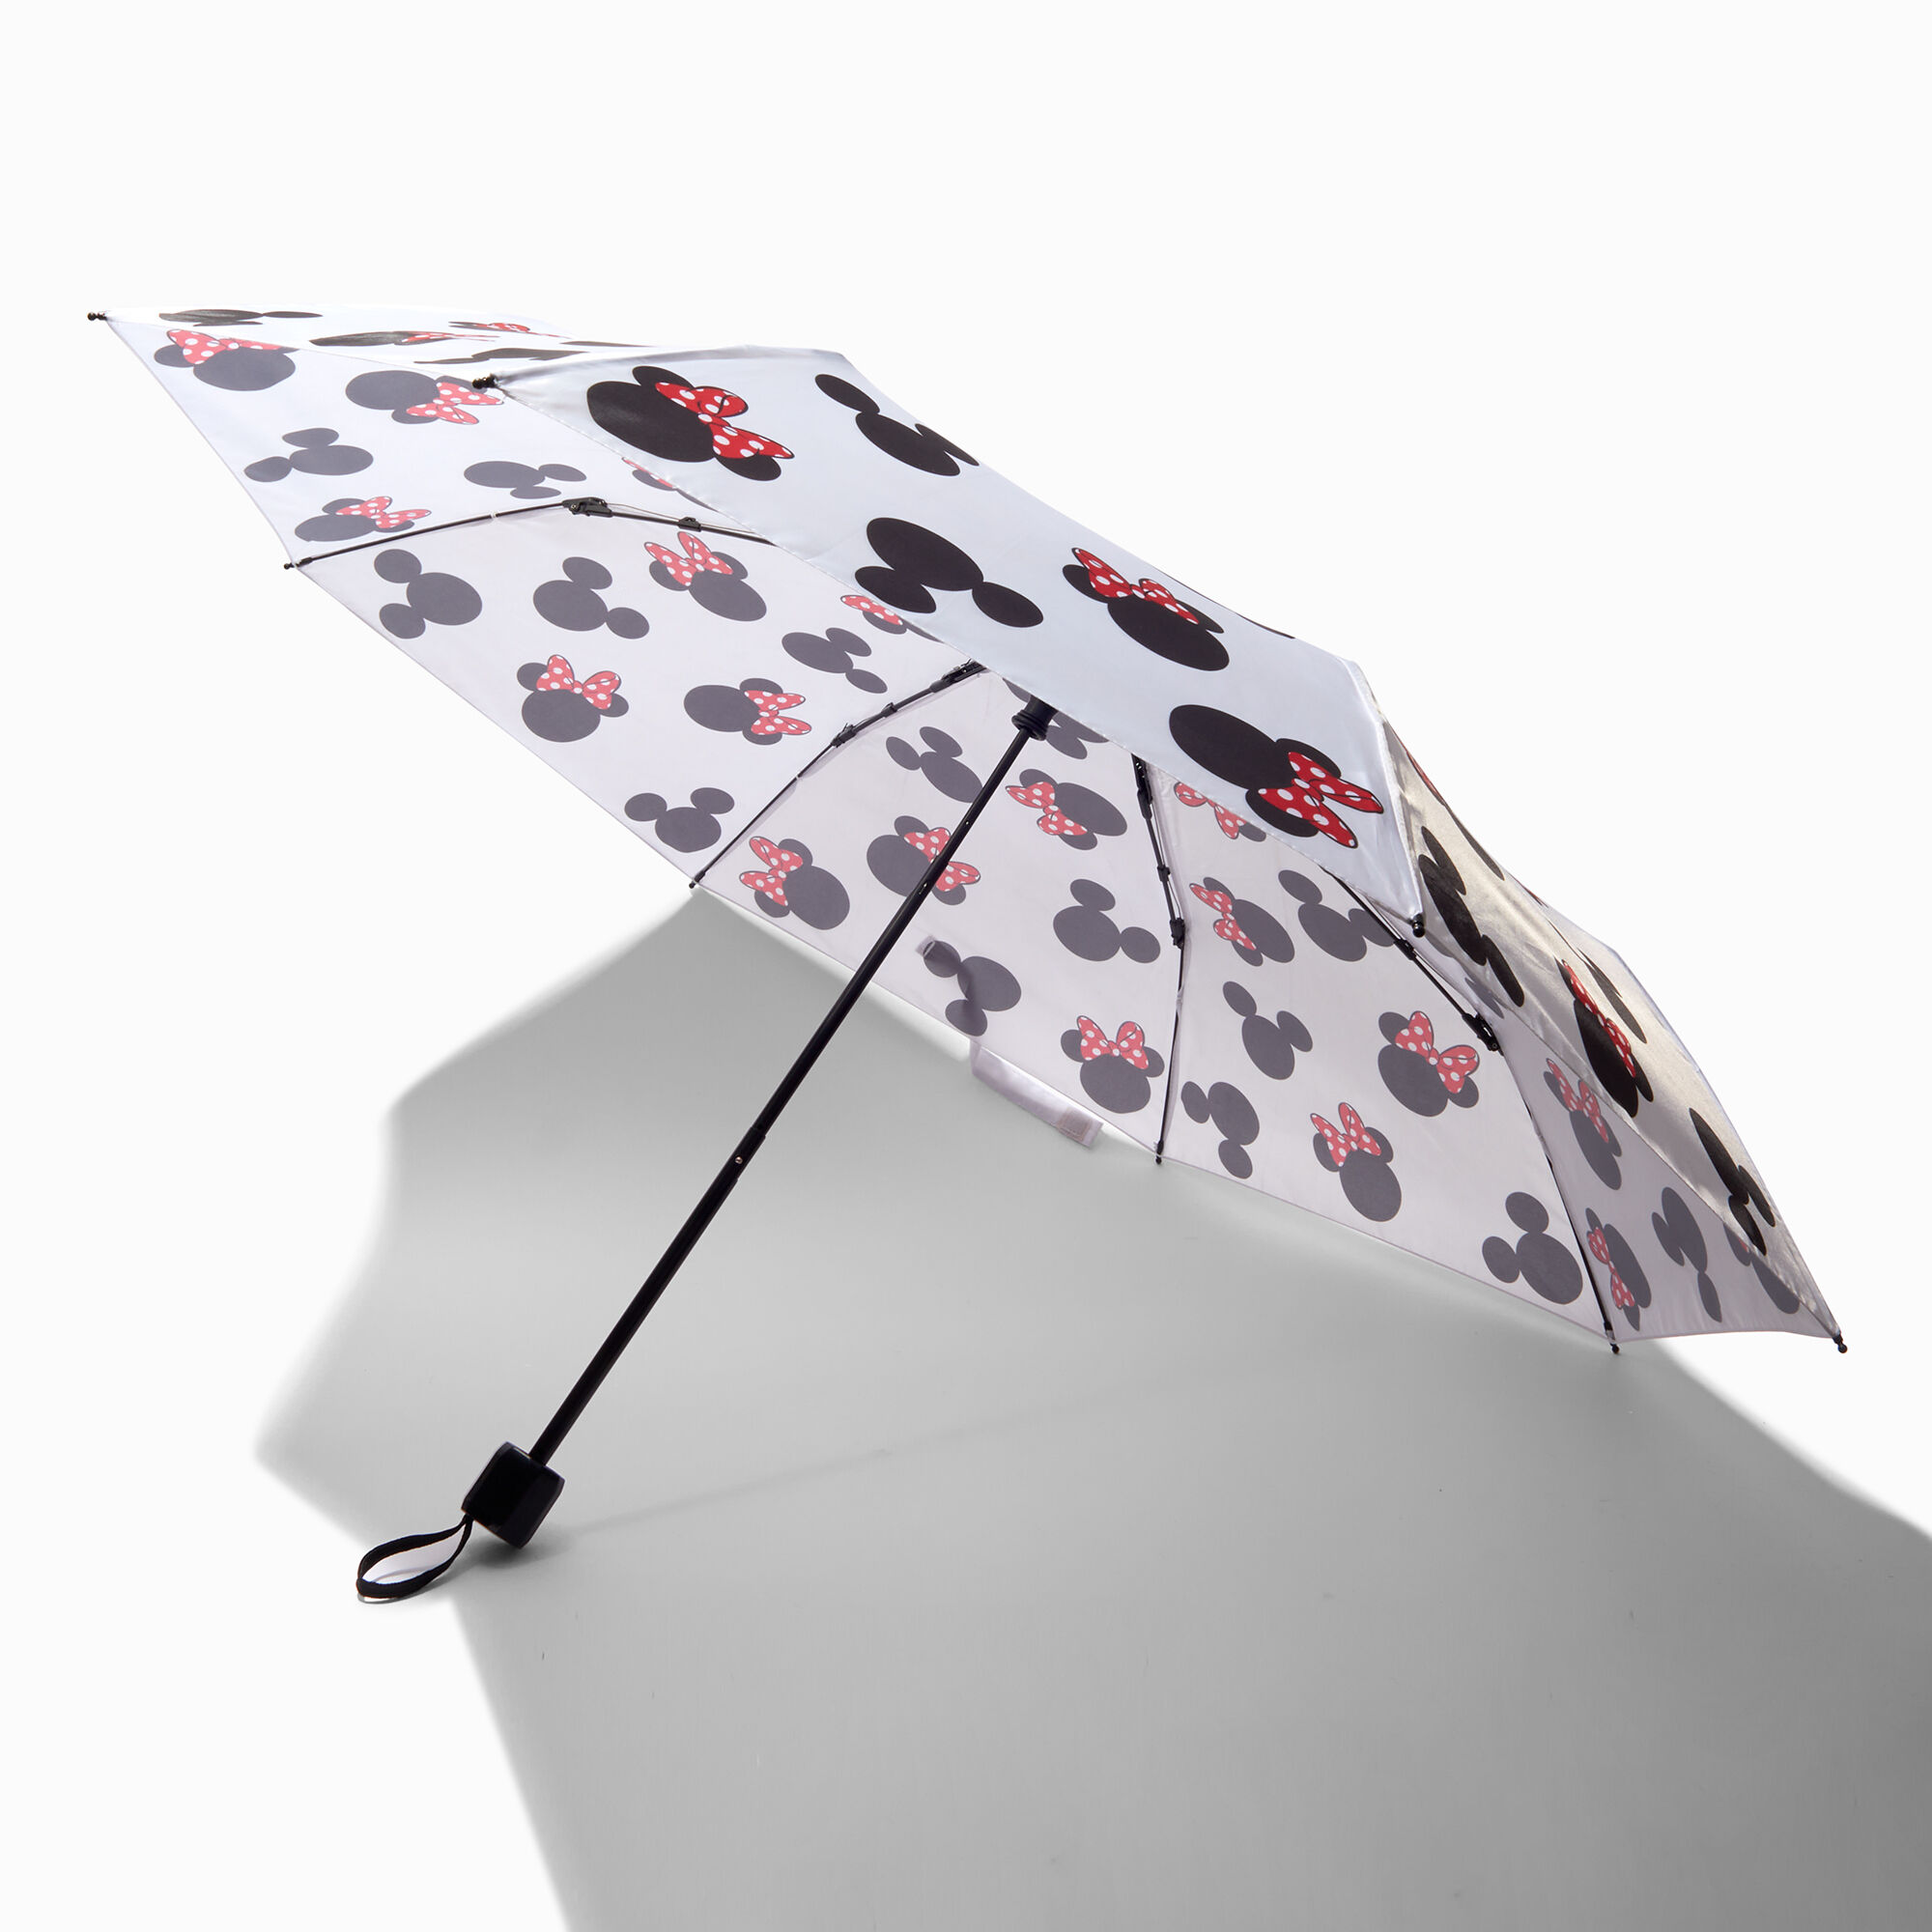 View Claires Disney 100 Mickey Mouse Umbrella information